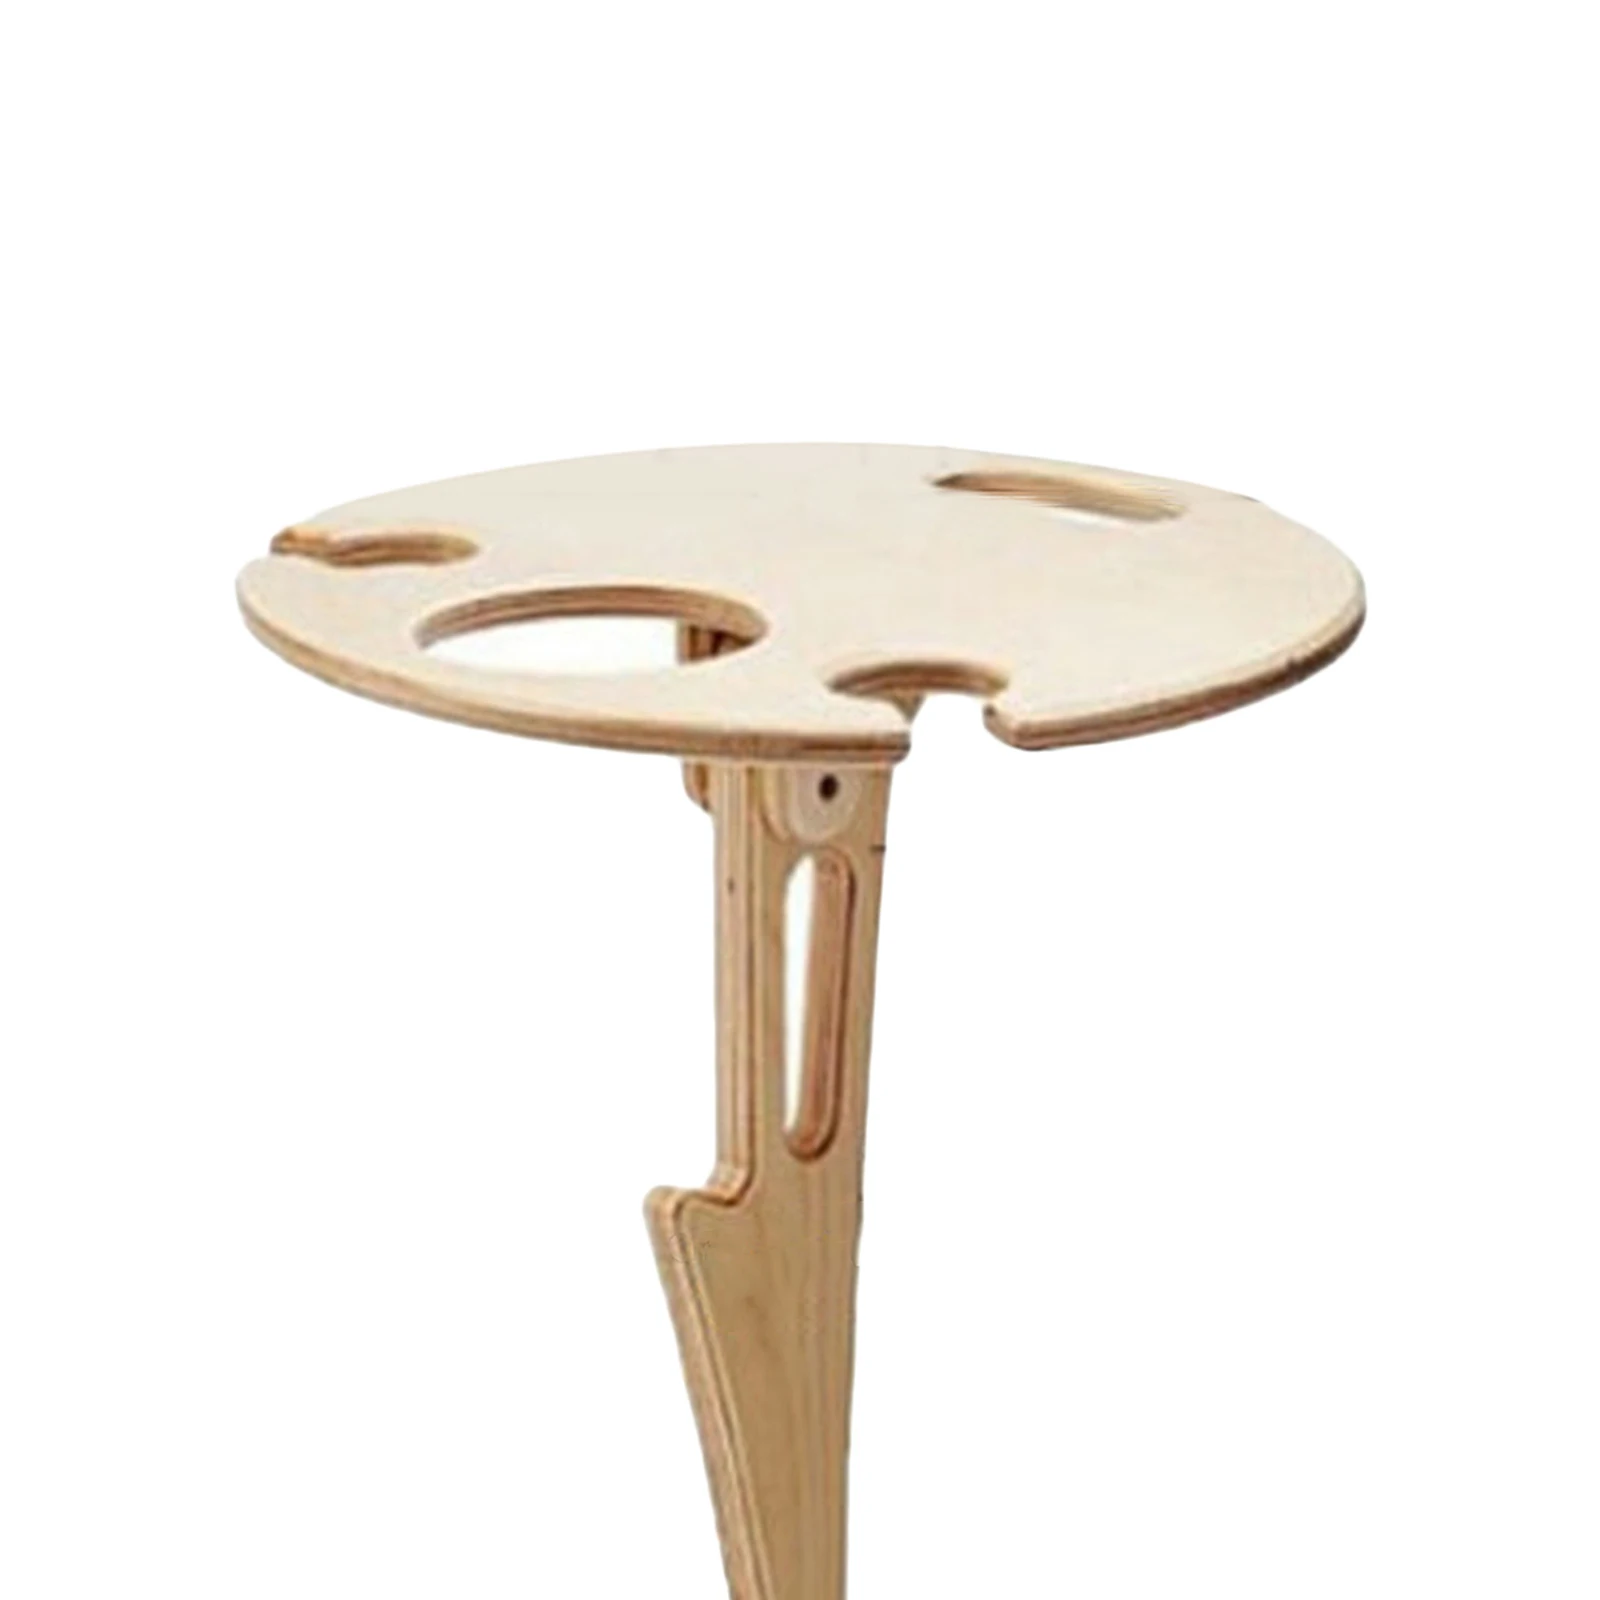 Folding Outdoor Portable Foldable Wine Table with Round Desktop Mini Wooden Beach Wine Glass Holder Lawn Plate Table  